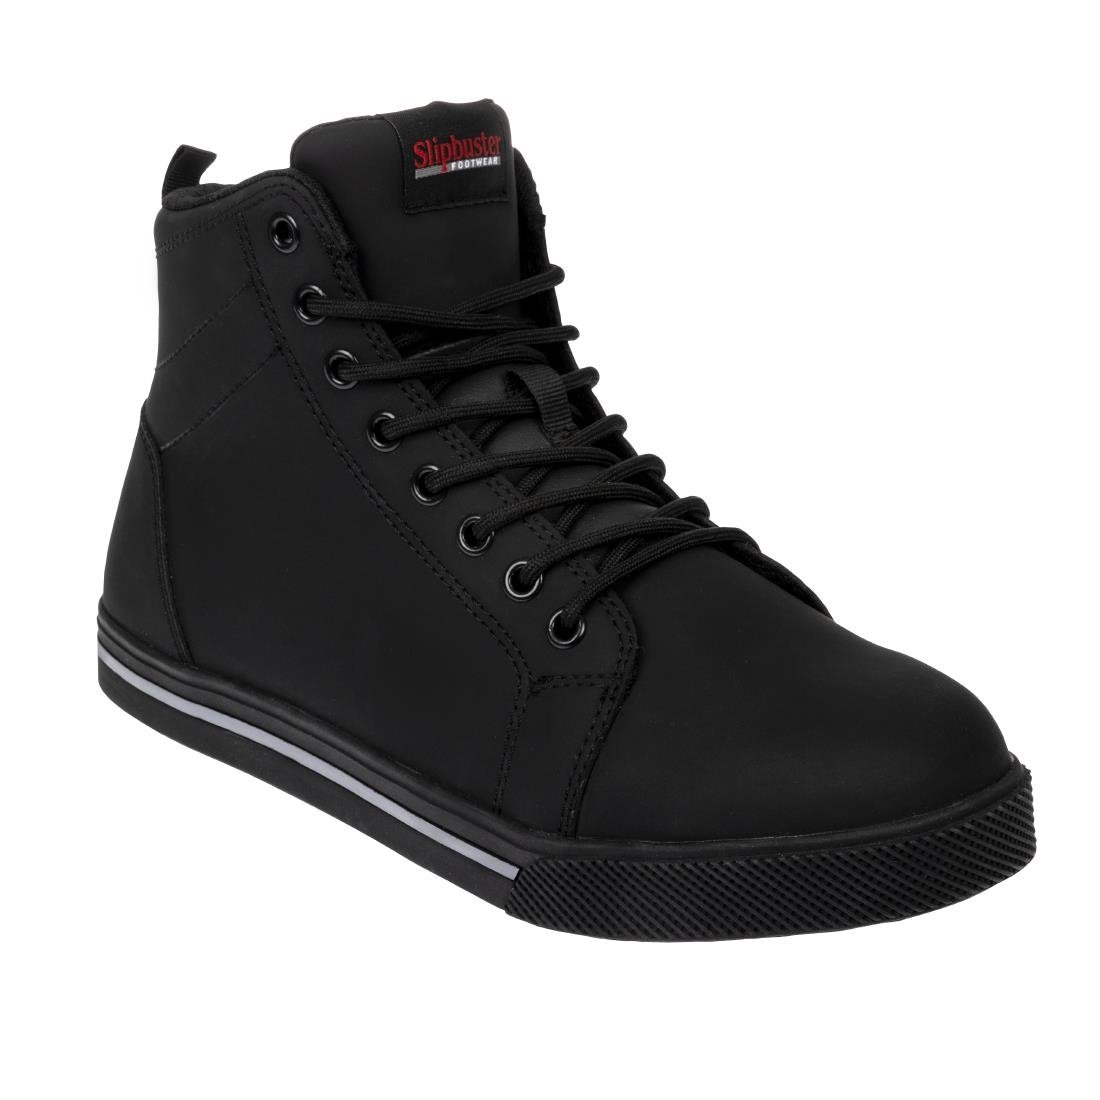 BA061-39 Slipbuster Recycled Microfibre Safety Hi Top Boots Matte Black 39 JD Catering Equipment Solutions Ltd